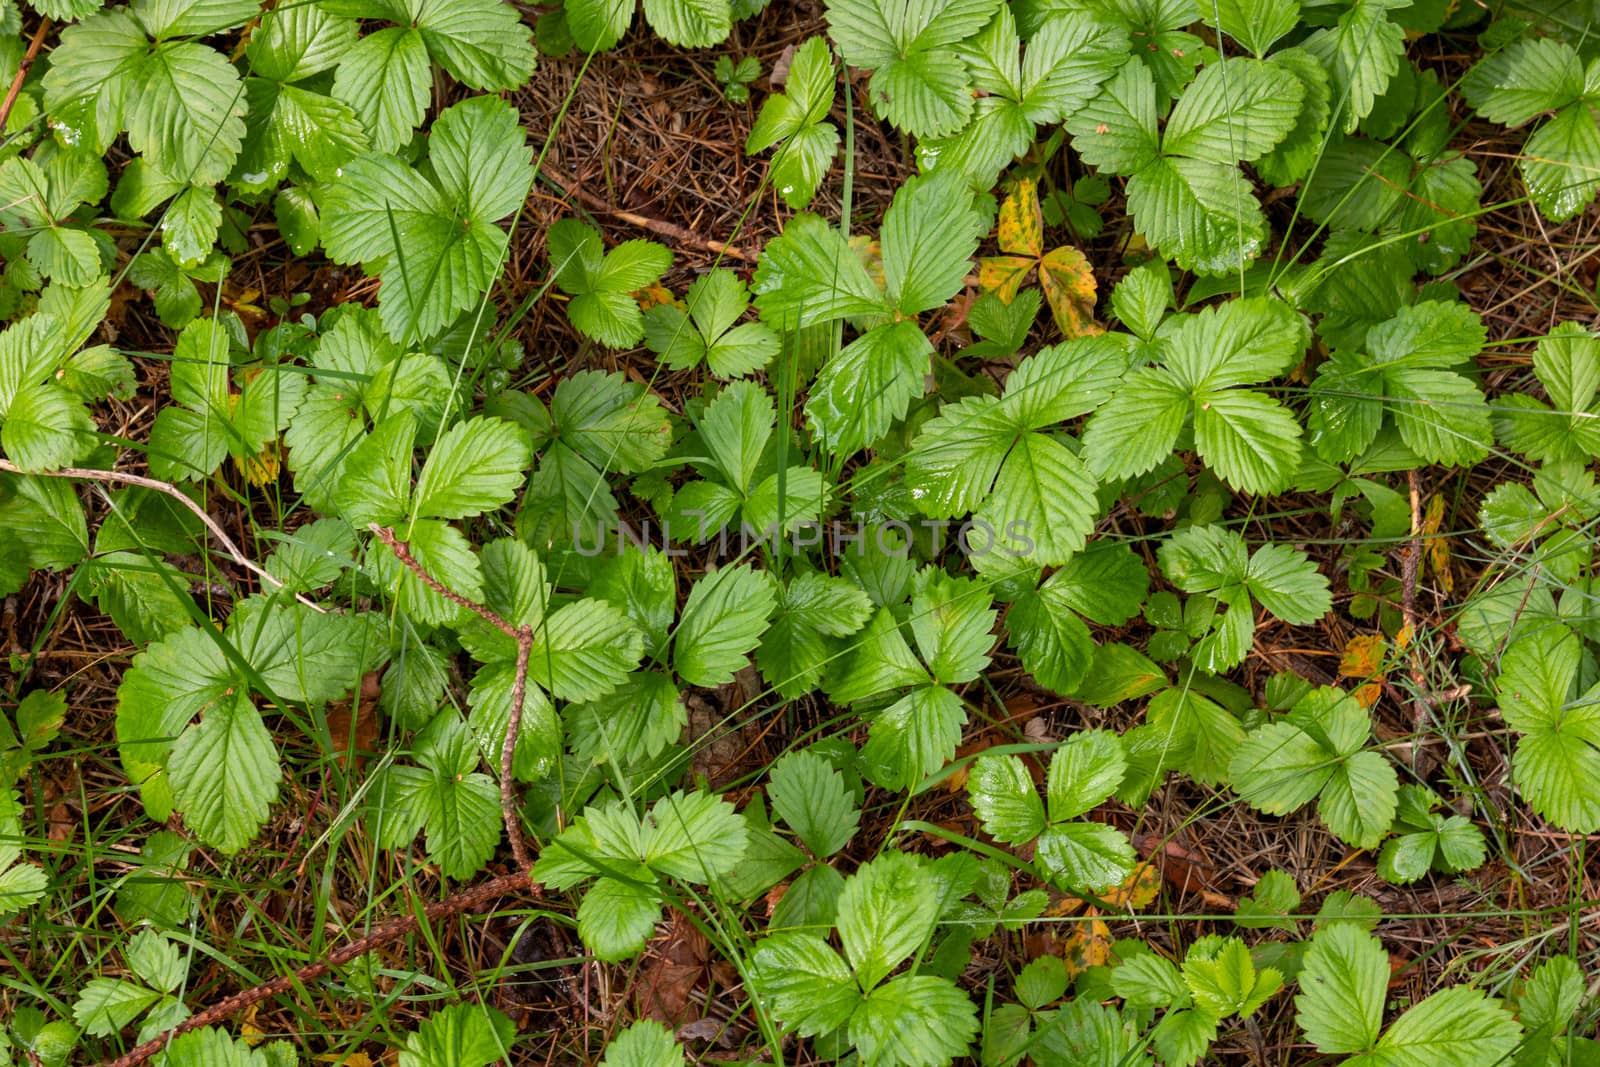 Glade covered with leaves of the woodland strawberry among grass at selective focus